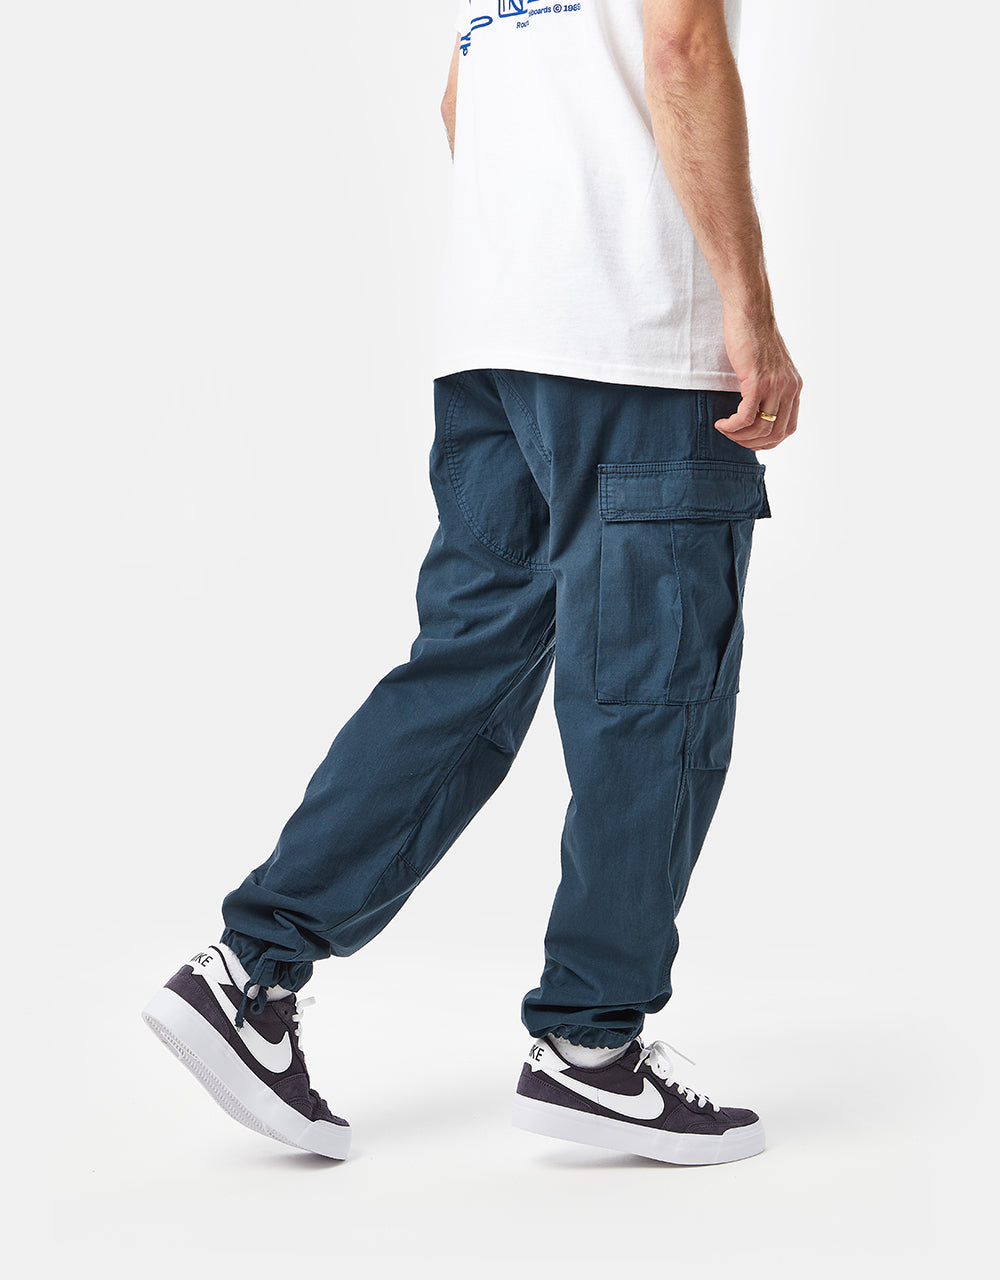 Route One Cargo Pants - Navy